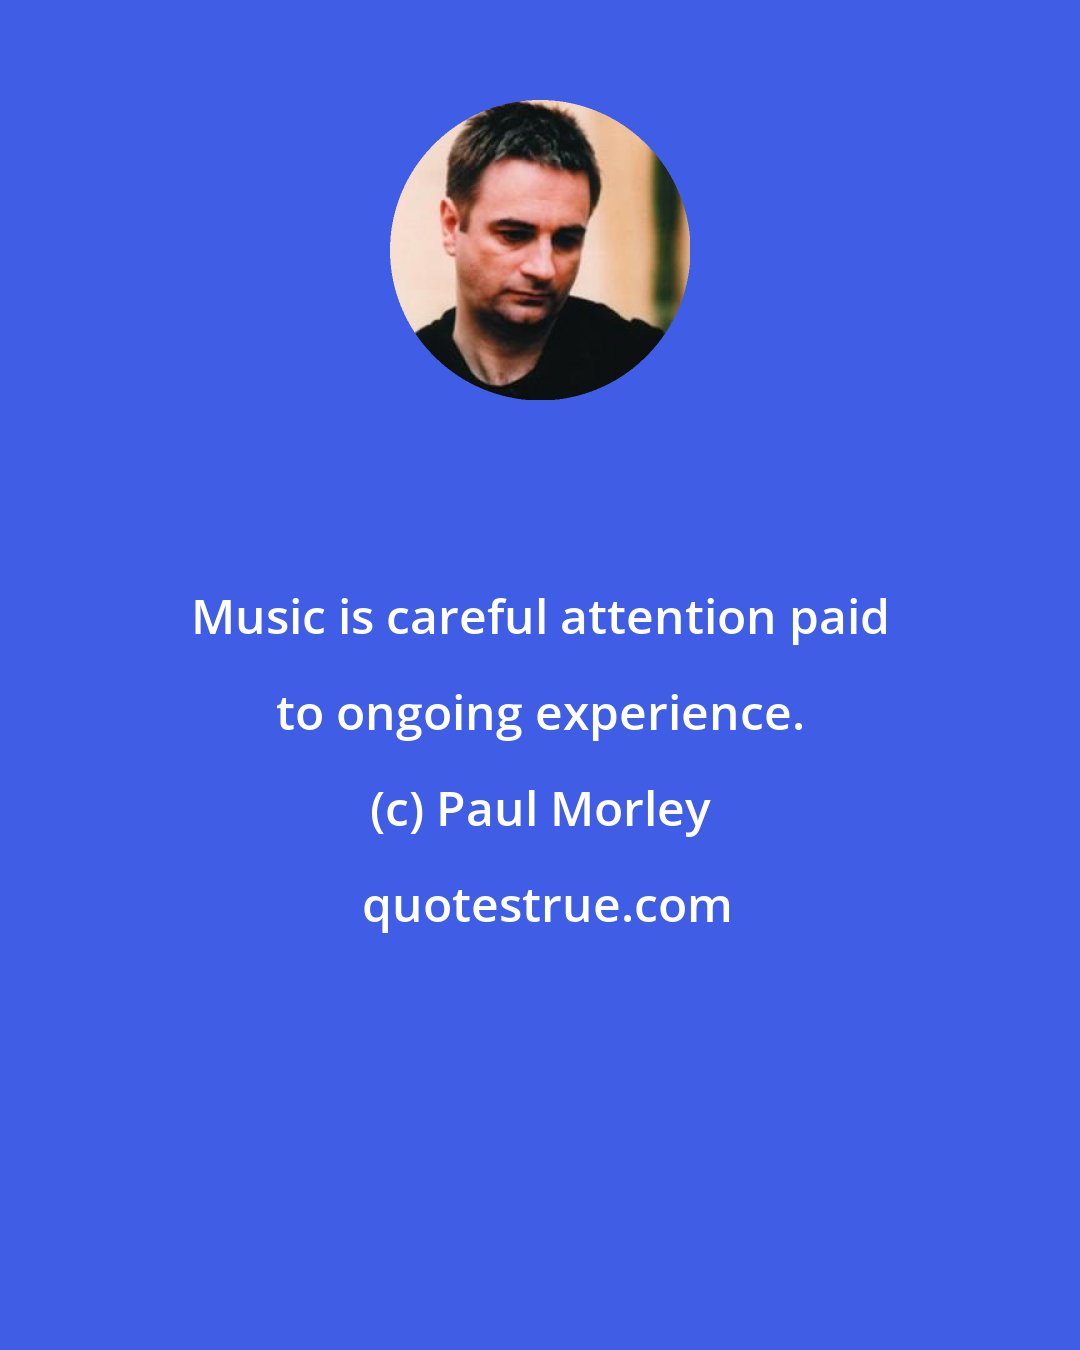 Paul Morley: Music is careful attention paid to ongoing experience.